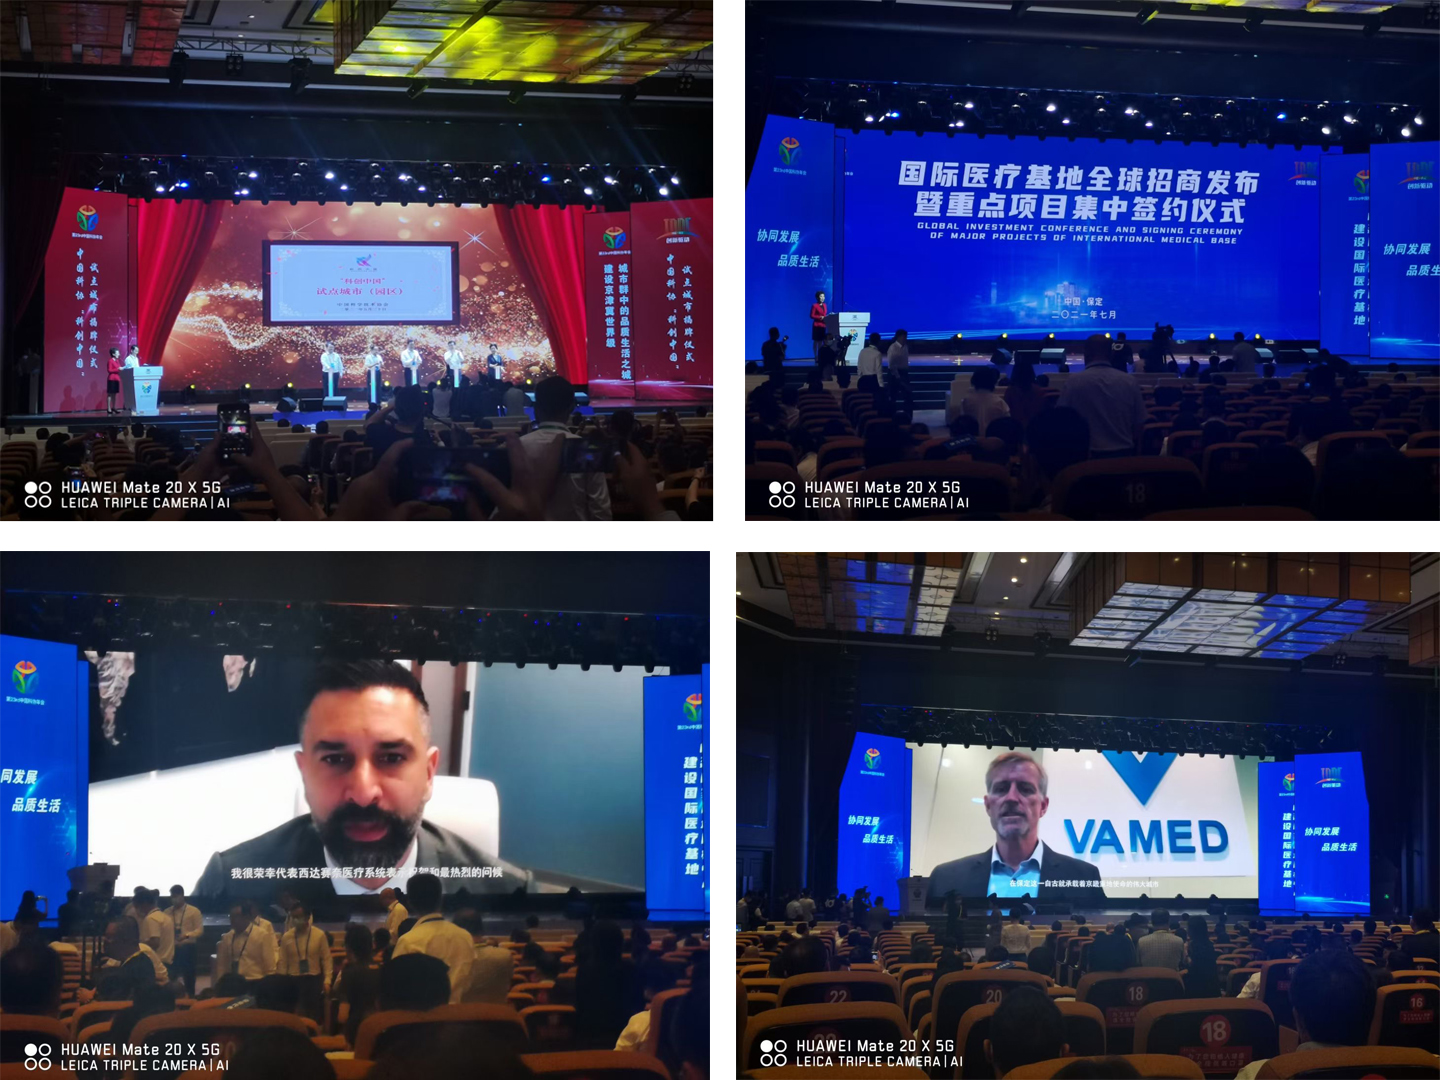 PRISES was invited to participate in the 23rd China Association for Science and Technology Annual Meeting